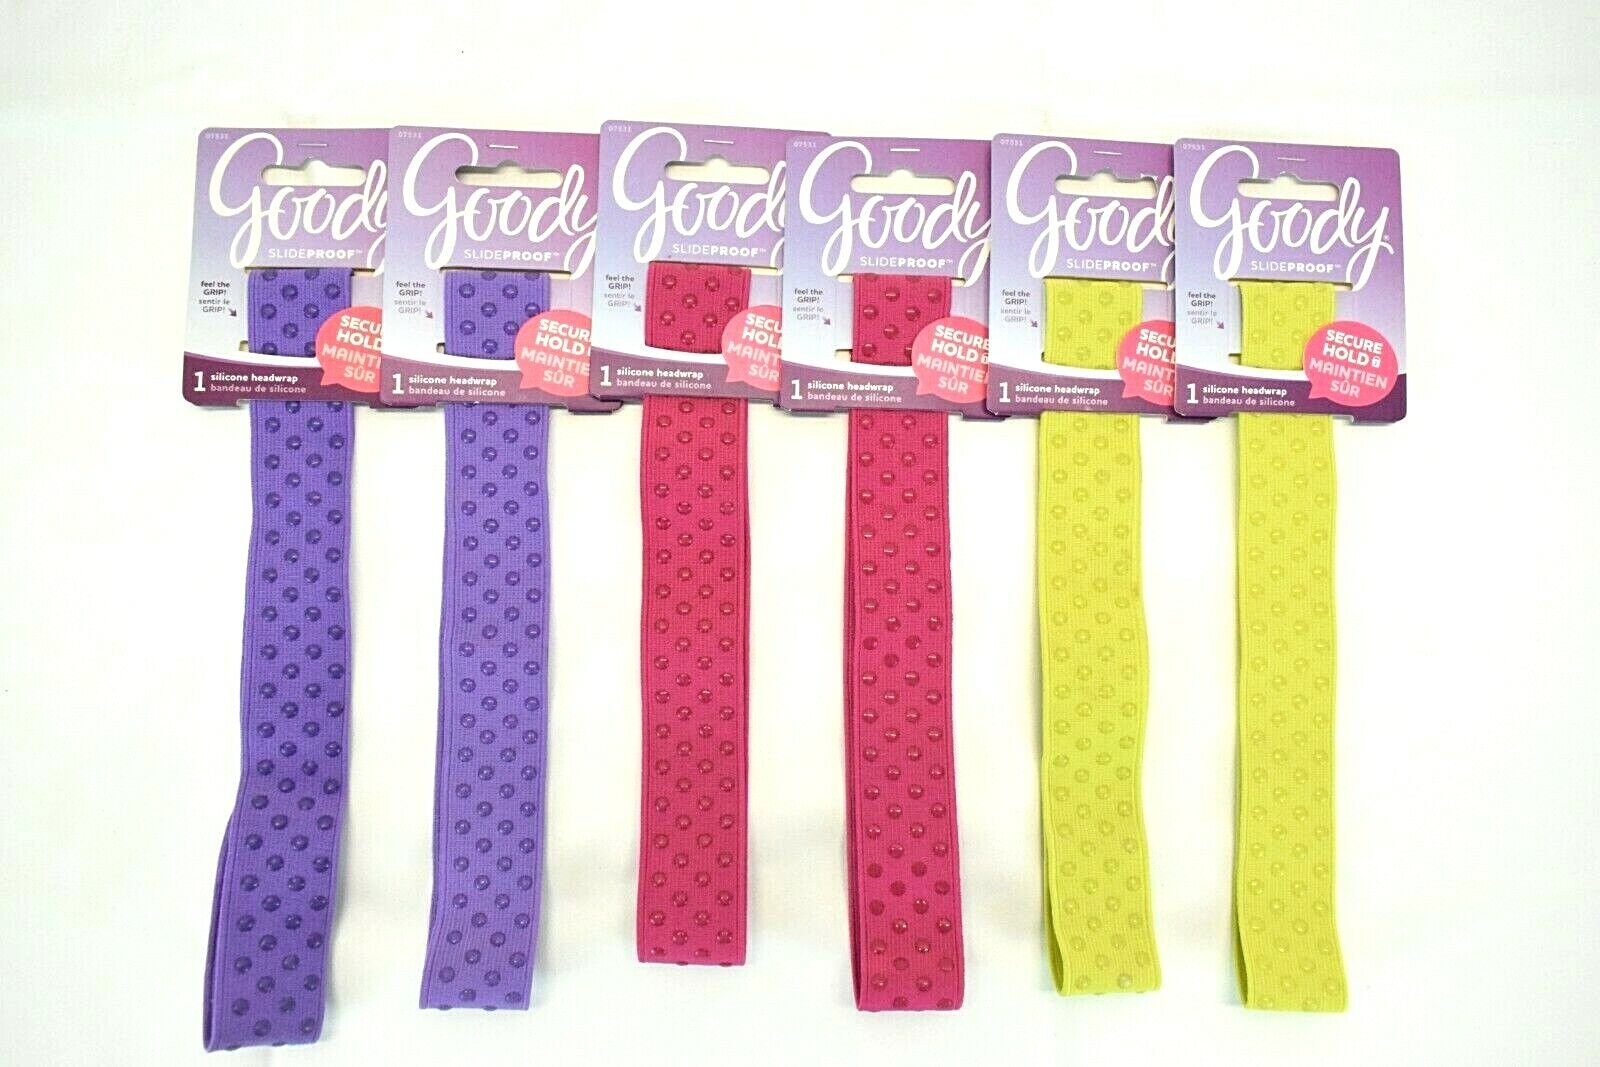 GOODY SLIDEPROOF WIDE DOTS HEADWRAP ASSORT COLORS UPC:041457075319 PACK:72/3